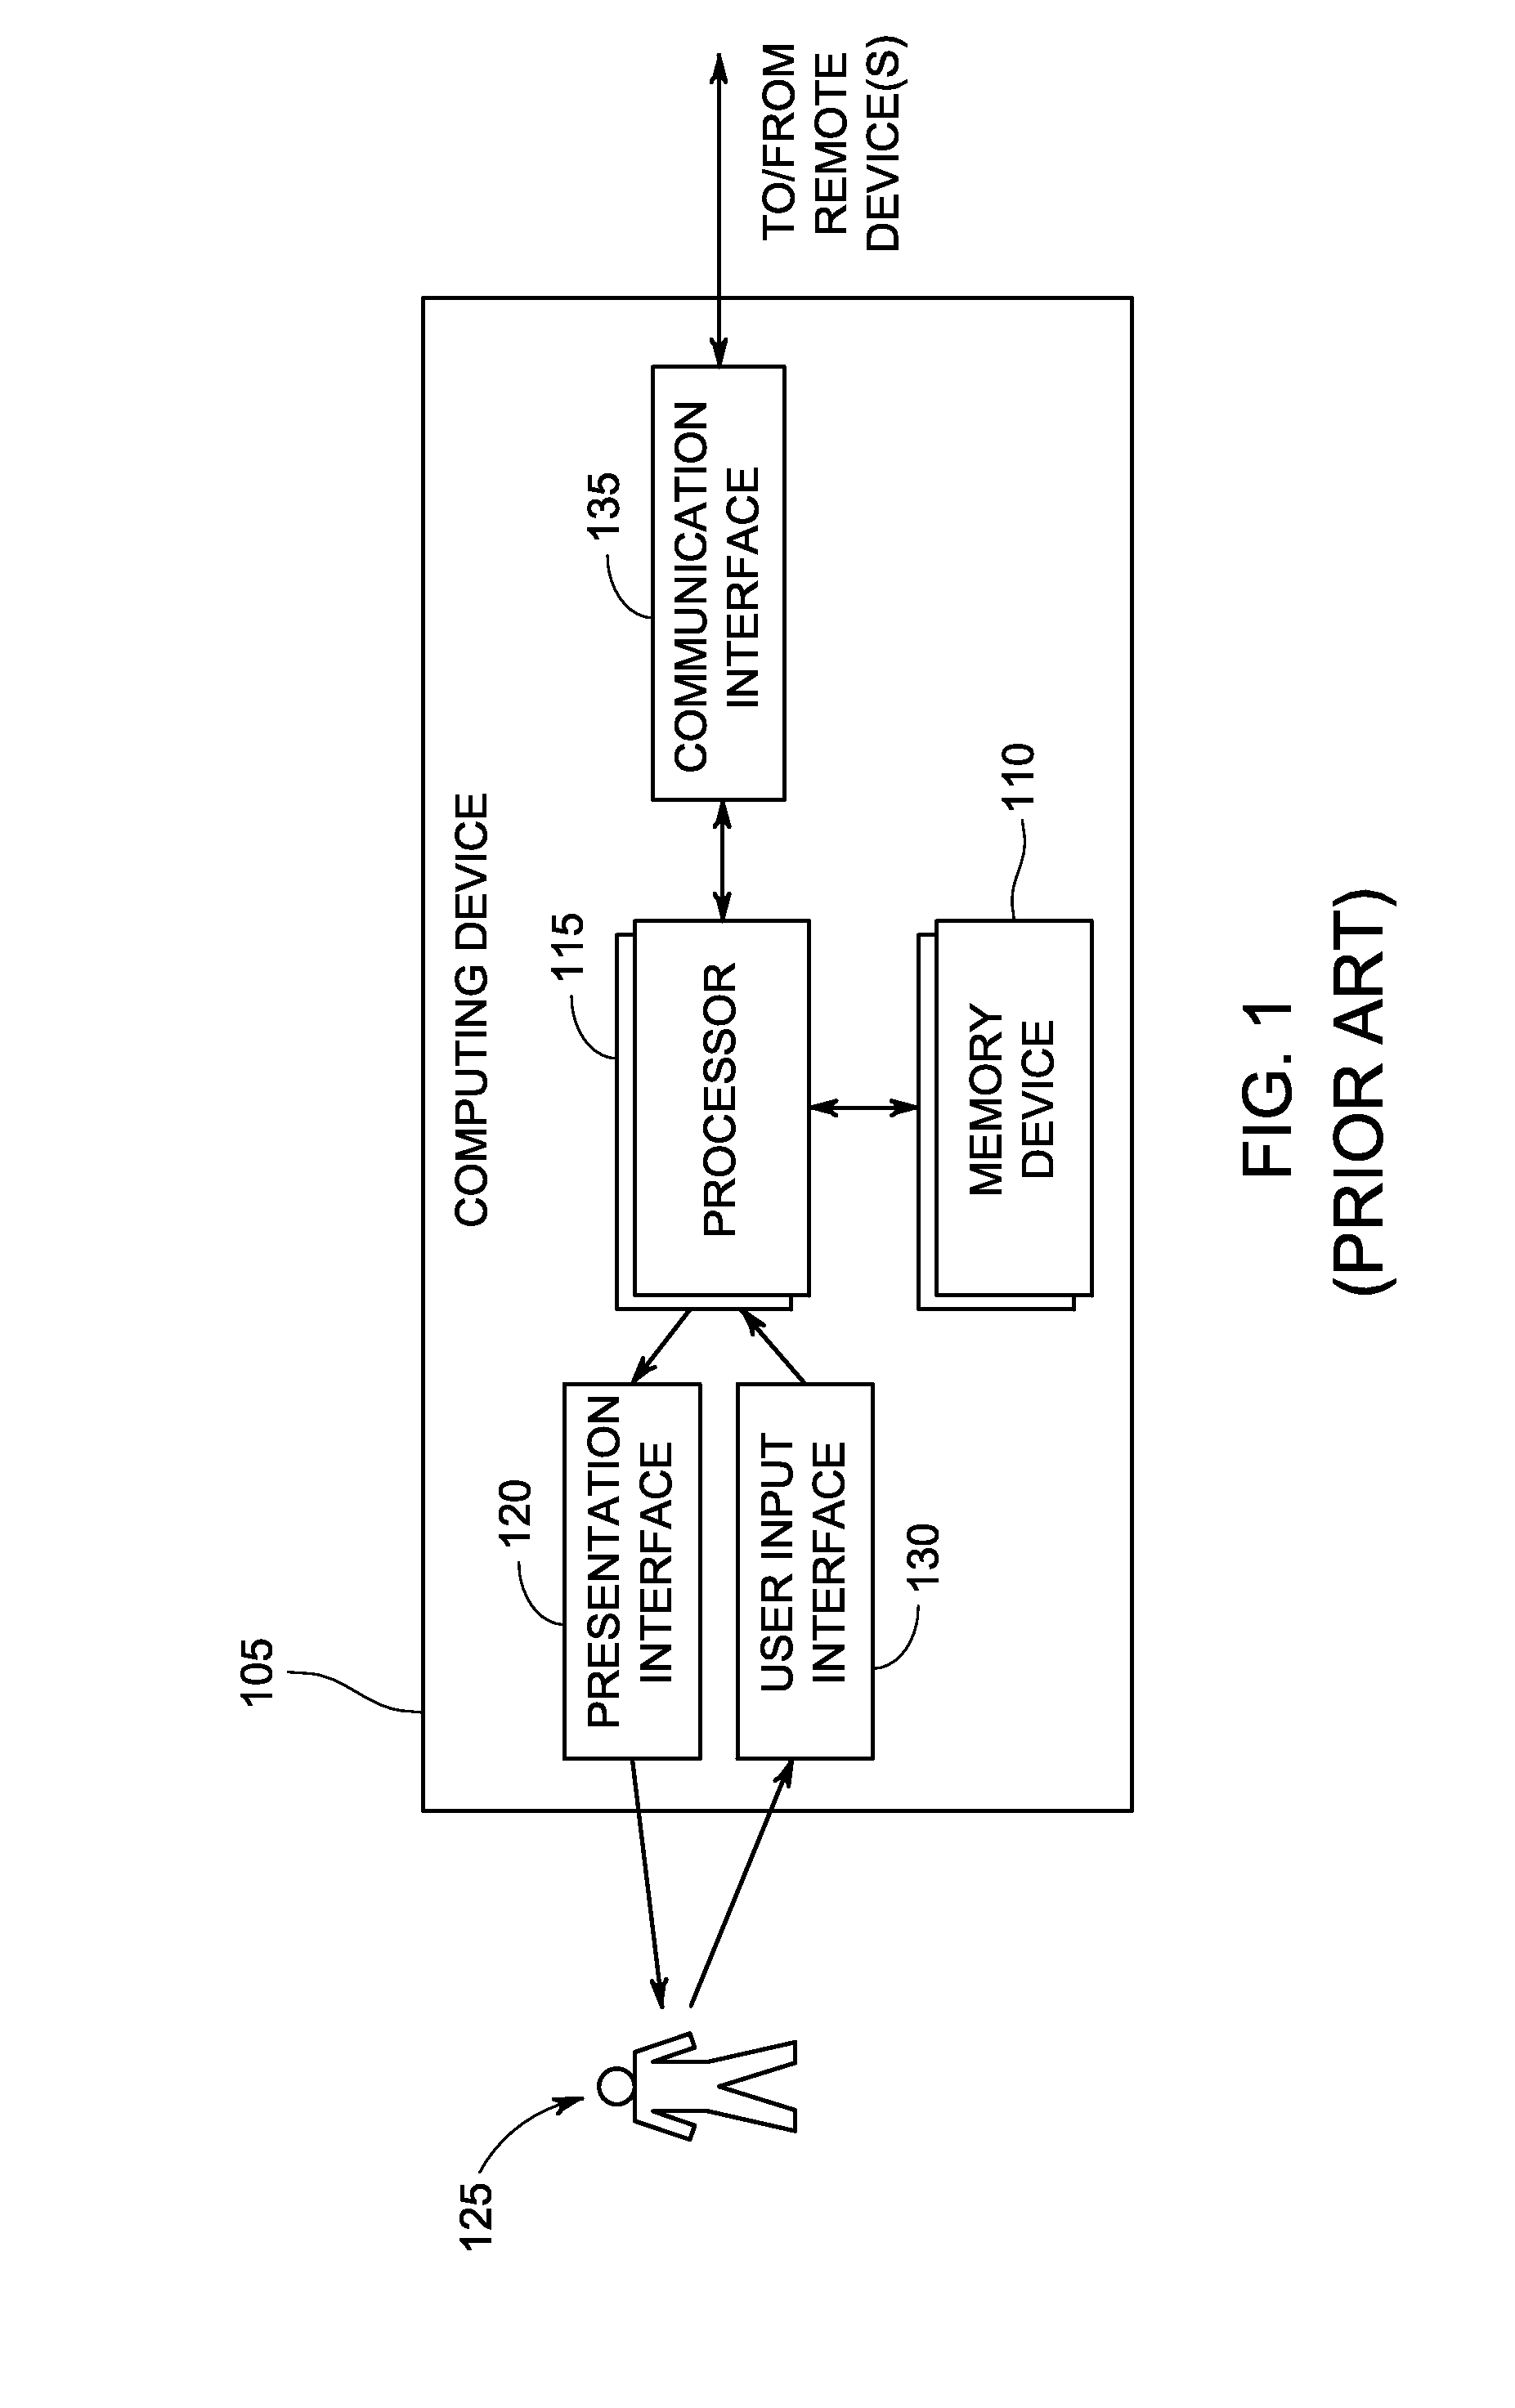 Method and apparatus for electric power system distribution state estimations